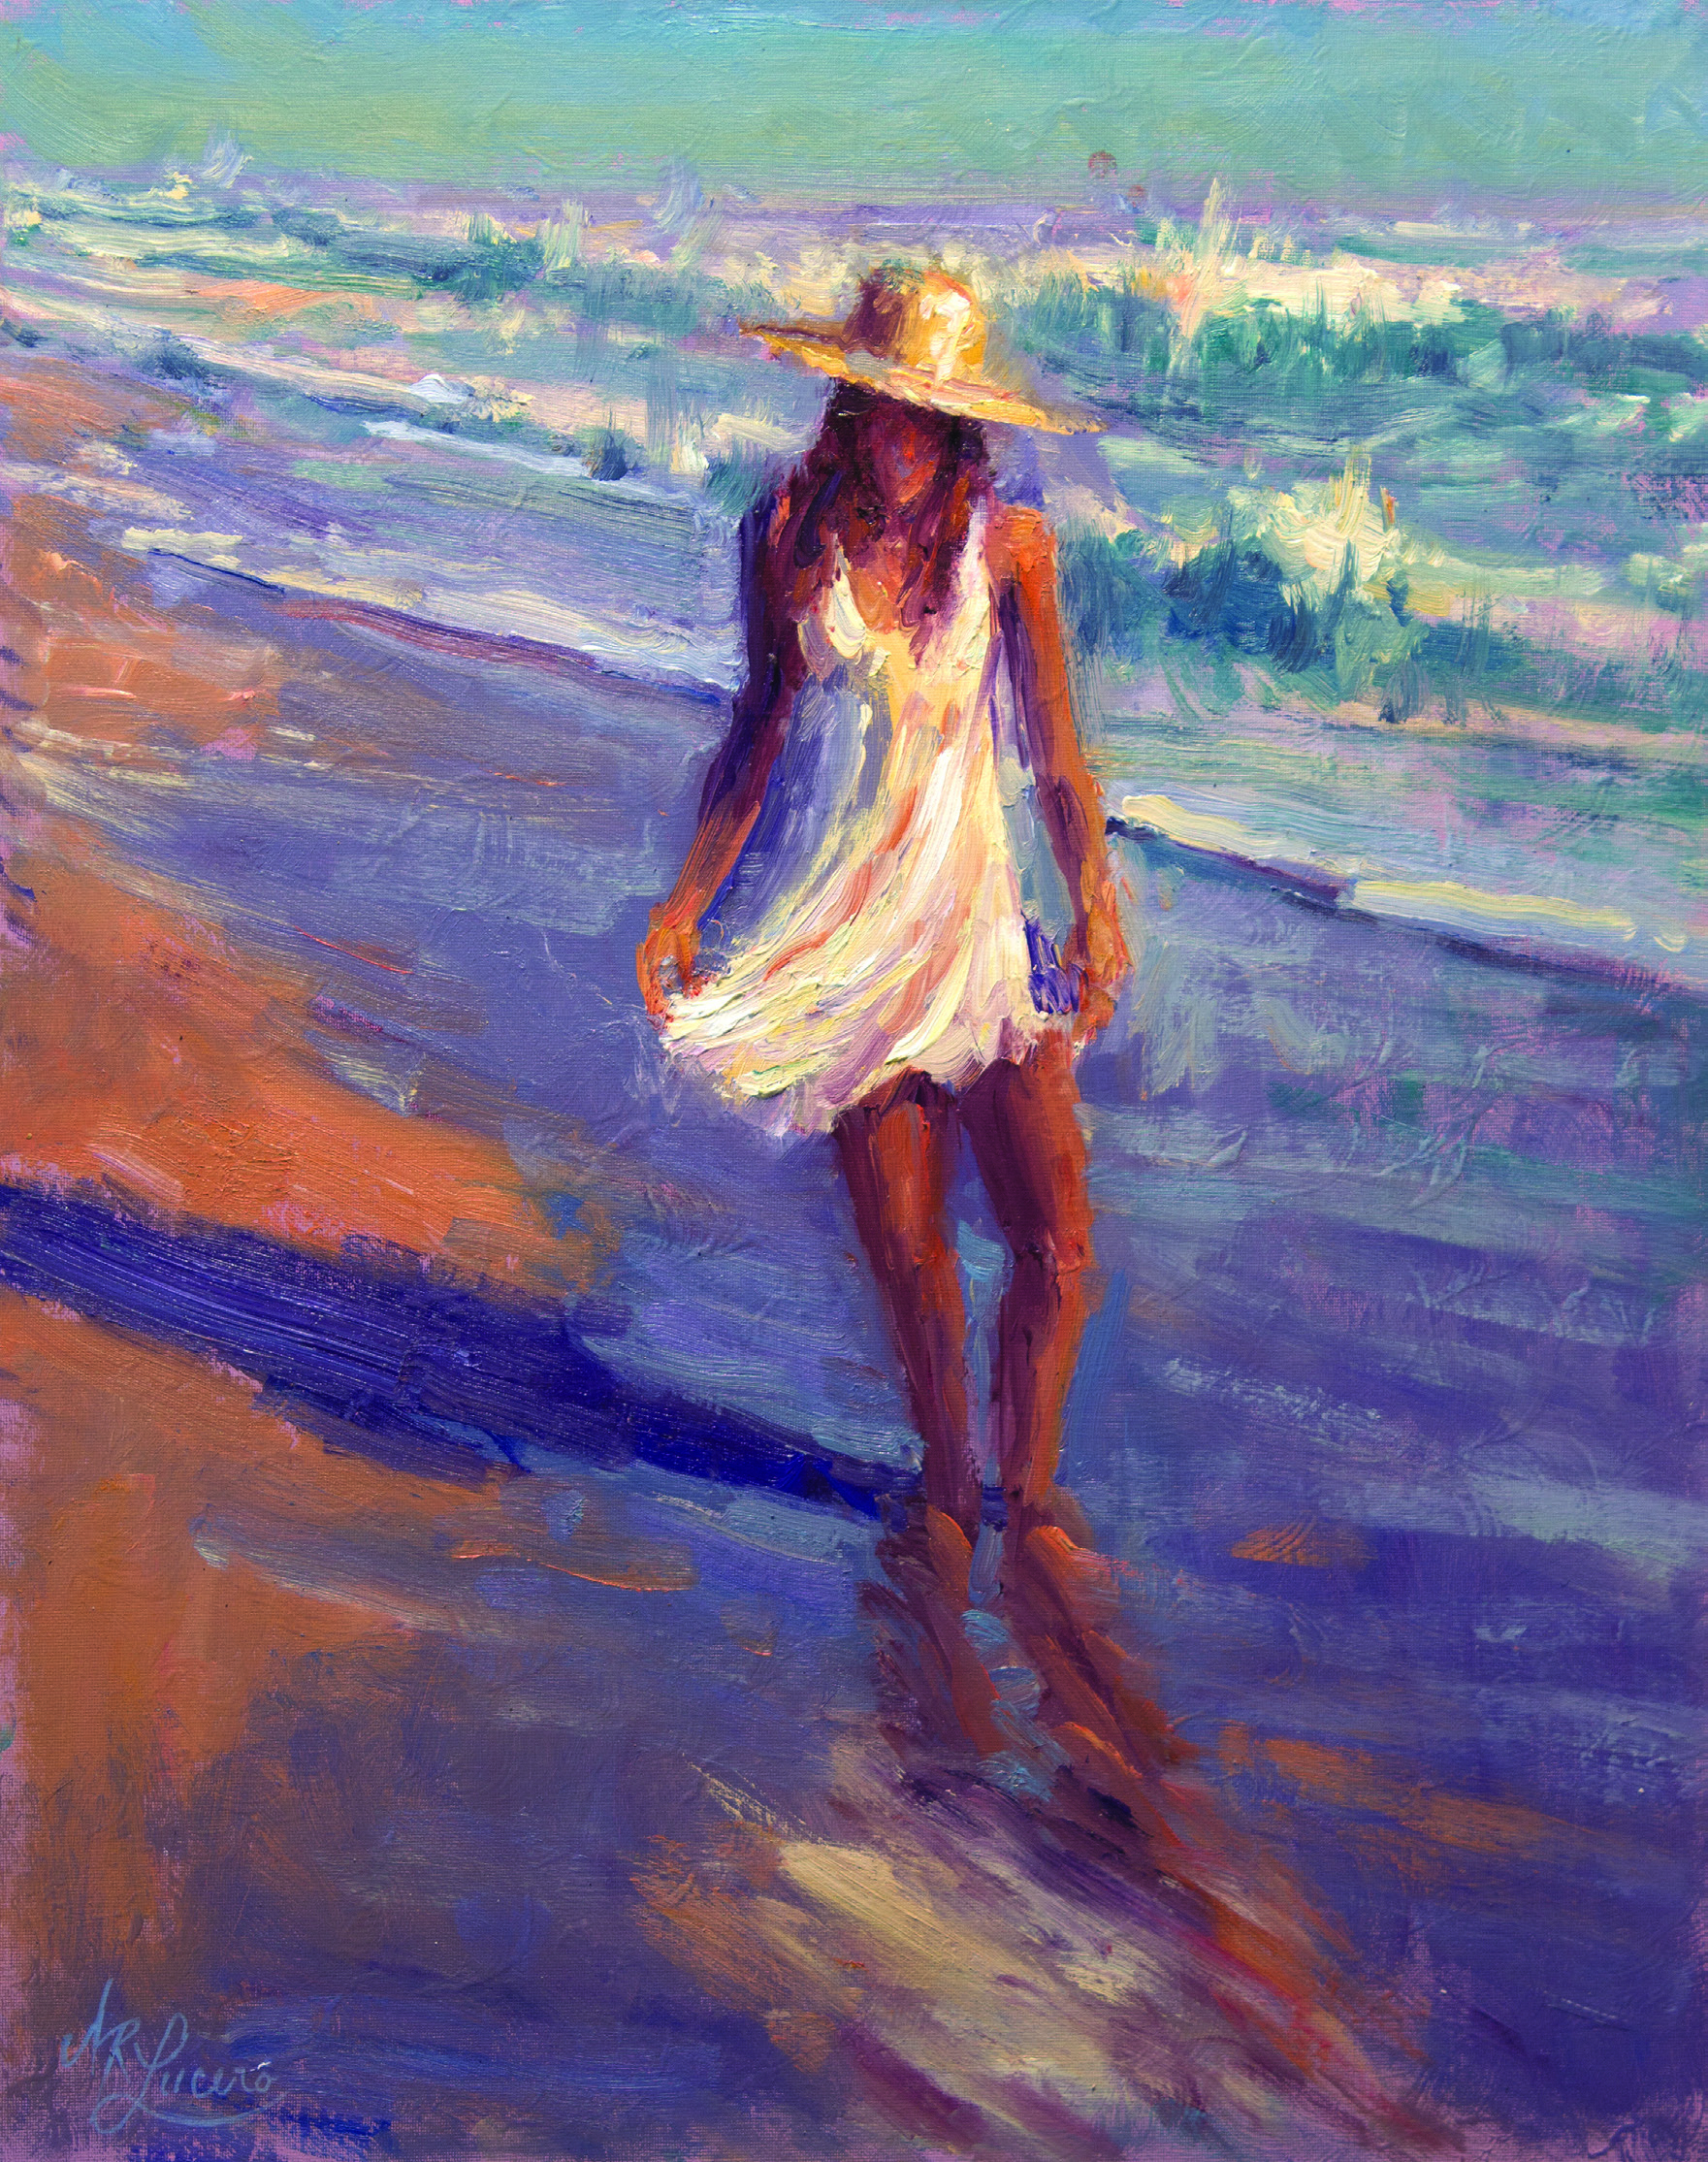 André Lucero, "Morning Stroll," 2018, oil, 20 x 16 in., Collection the artist, Plein air